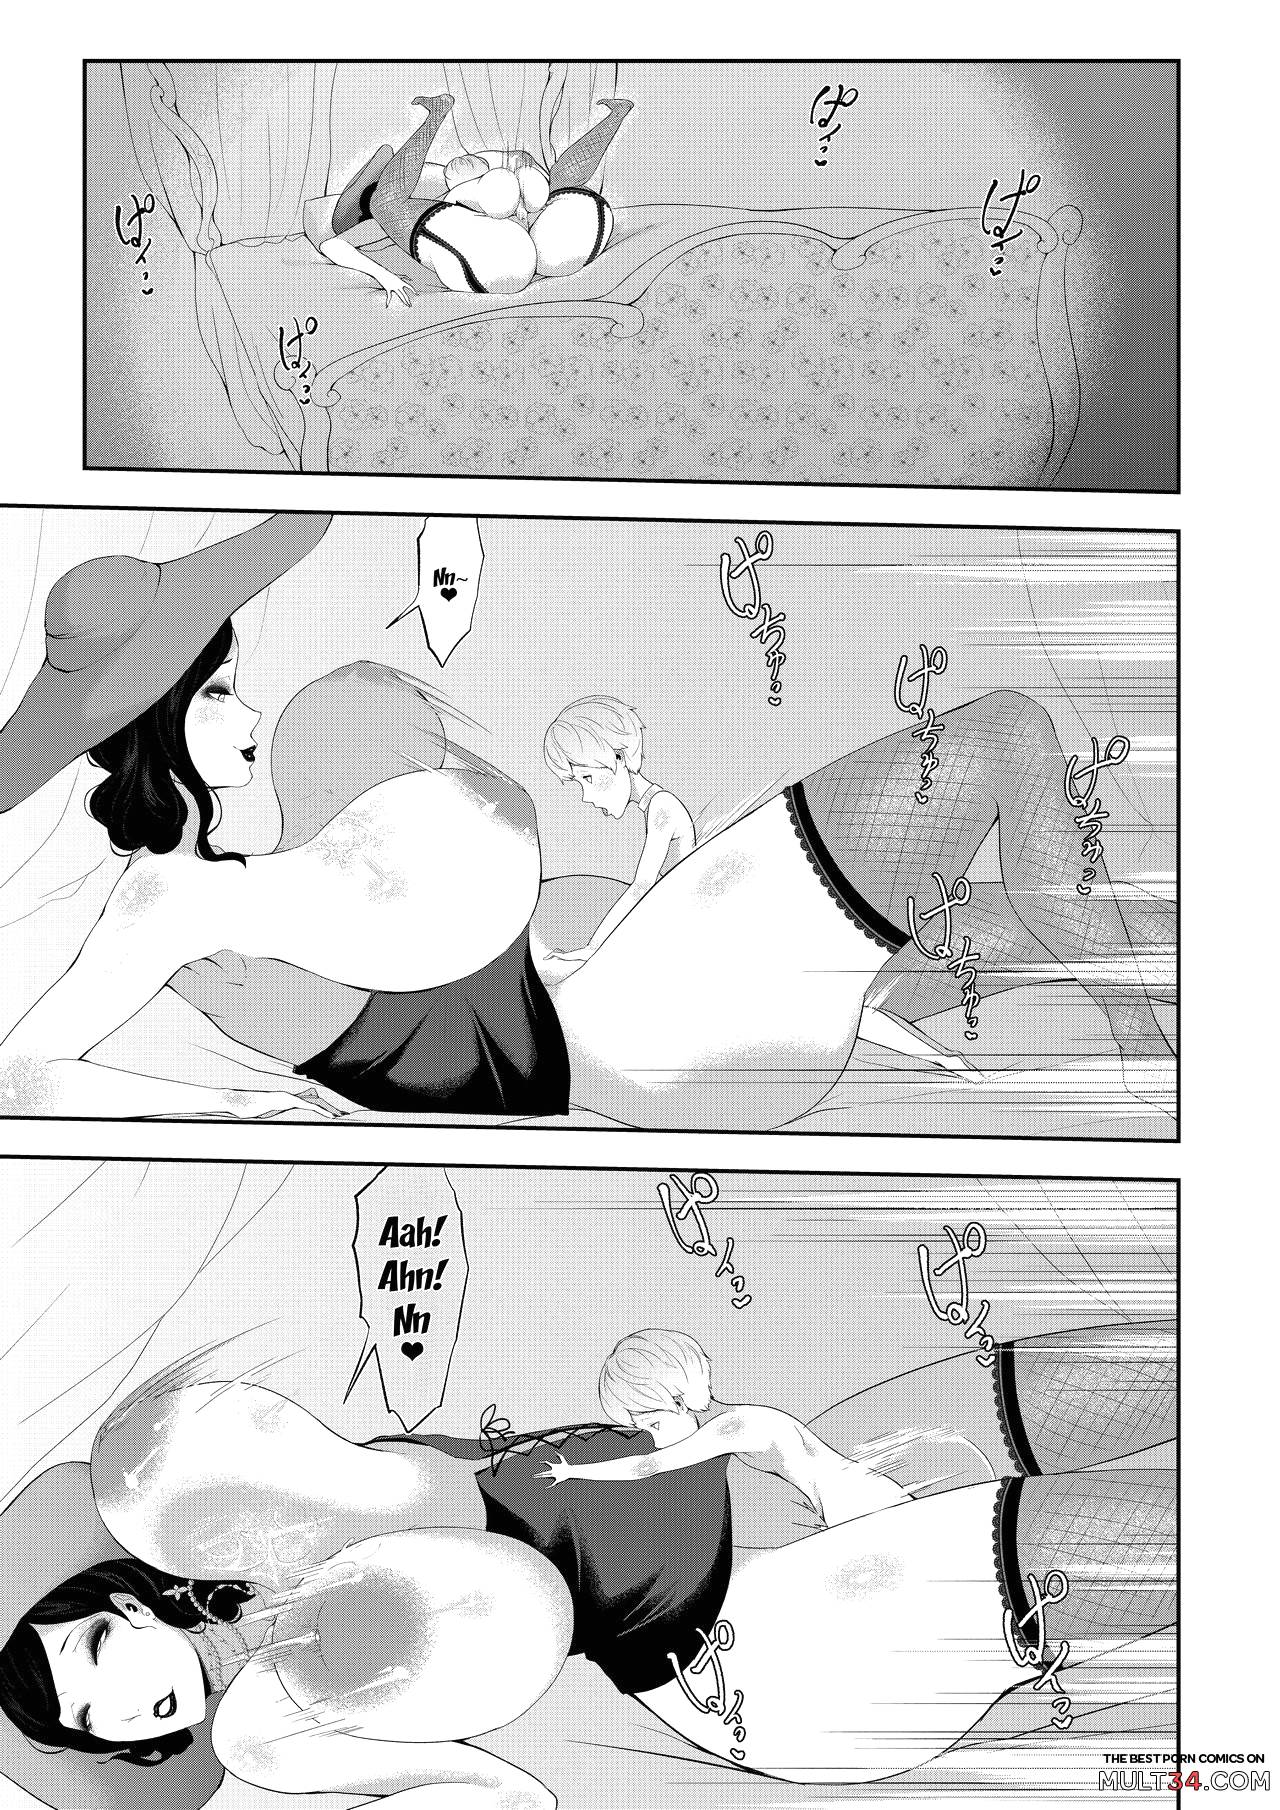 Dimitrescu-sama's Squeezing Out Your Sperm page 29